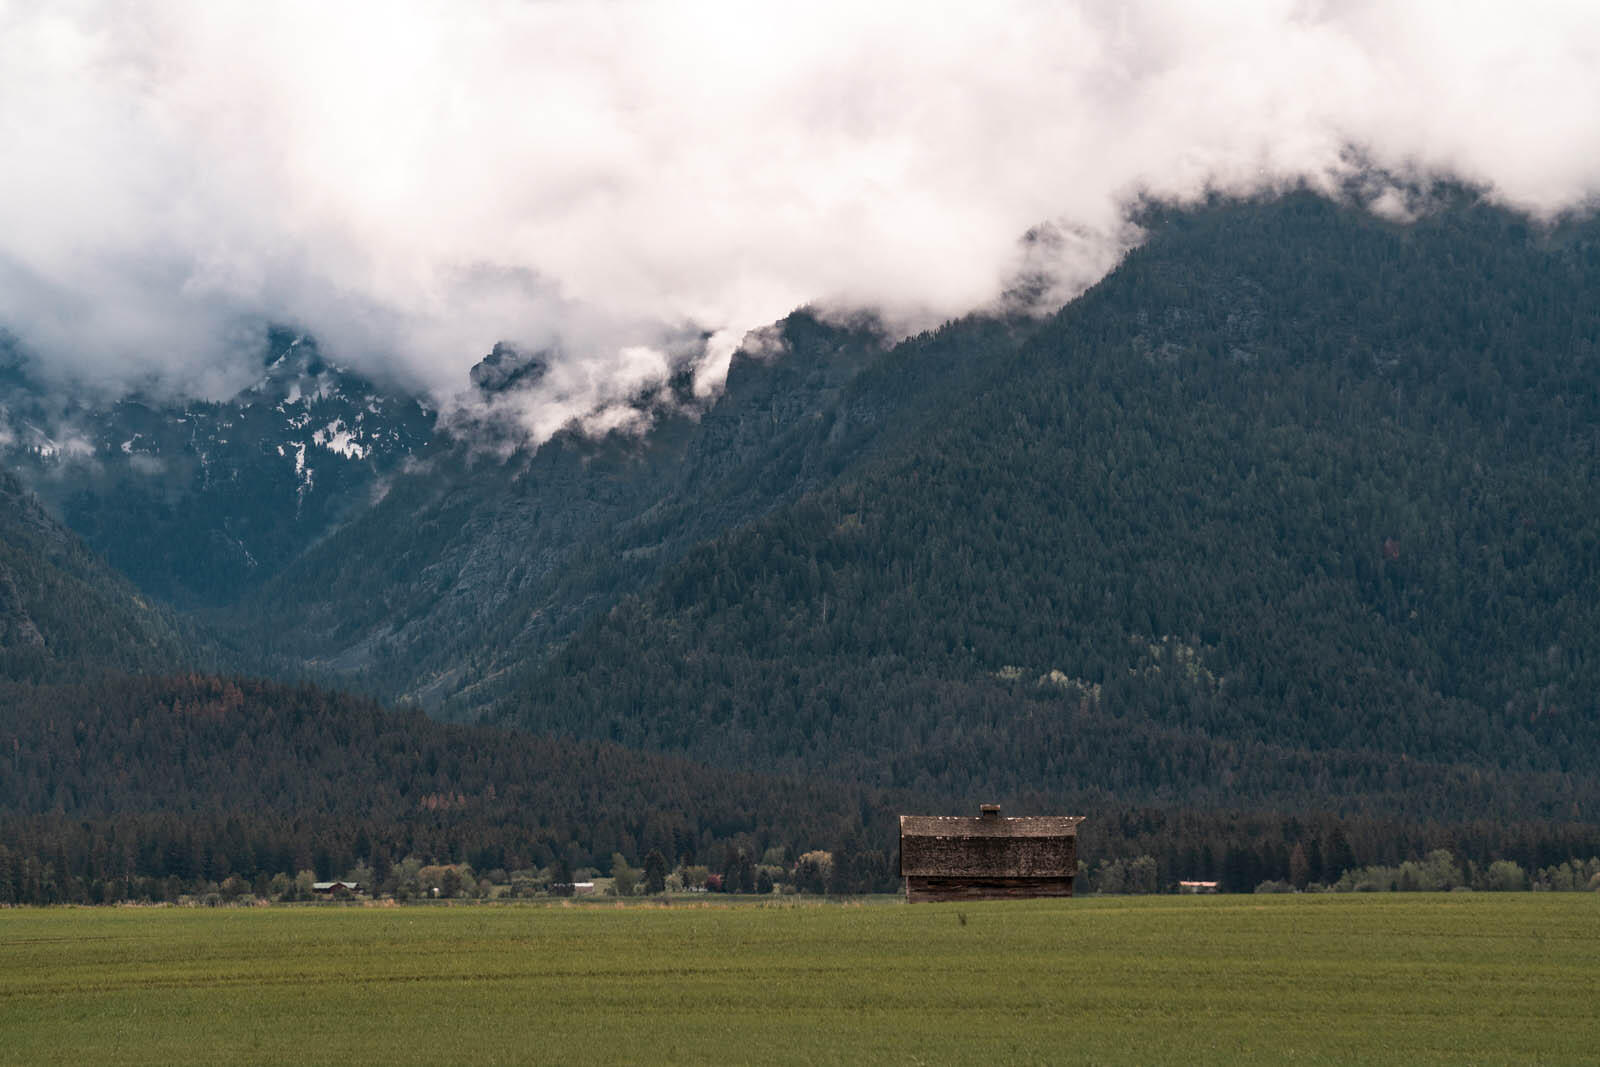 barn in a field along the roadside in Western Montana with clouds covering the mountains in the backdrop